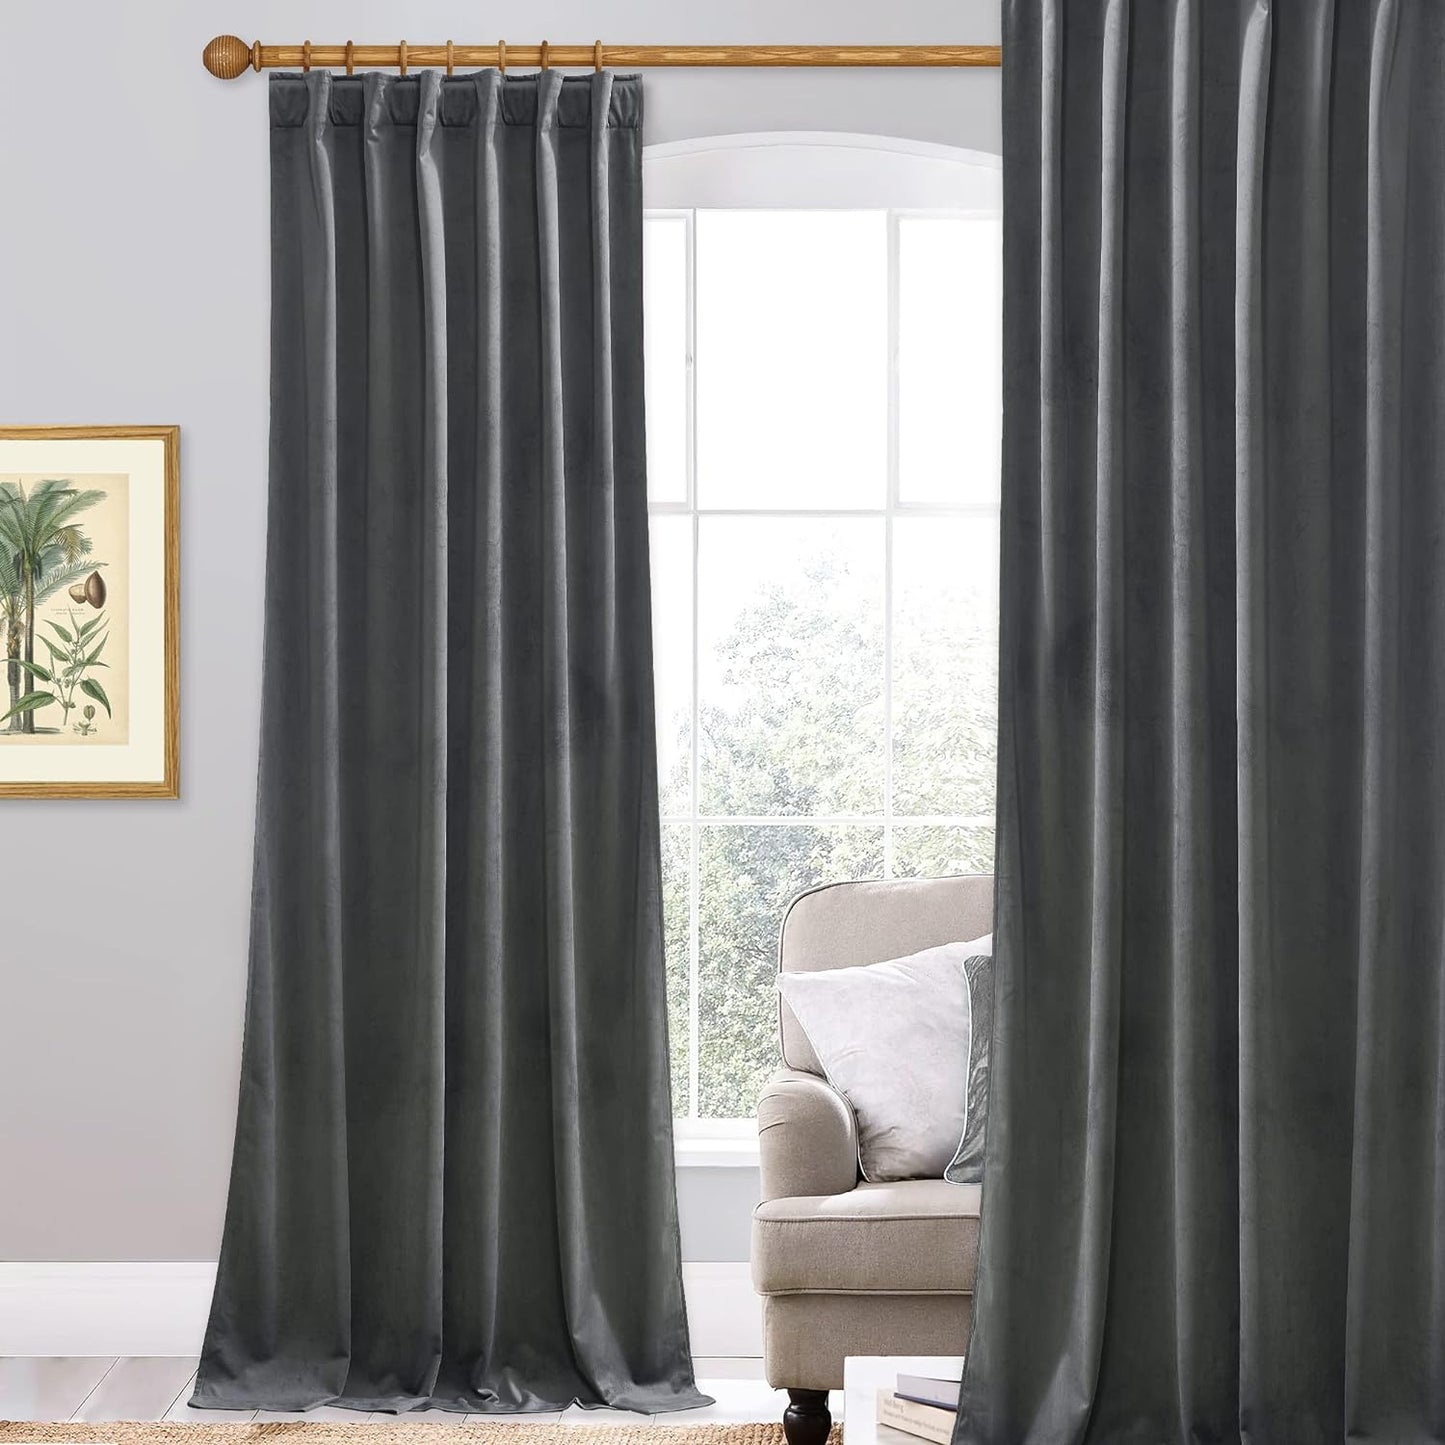 Stangh Navy Blue Velvet Curtains 96 Inches Long for Living Room, Luxury Blackout Sliding Door Curtains Thermal Insulated Window Drapes for Bedroom, W52 X L96 Inches, 1 Panel  StangH Grey W52 X L84 